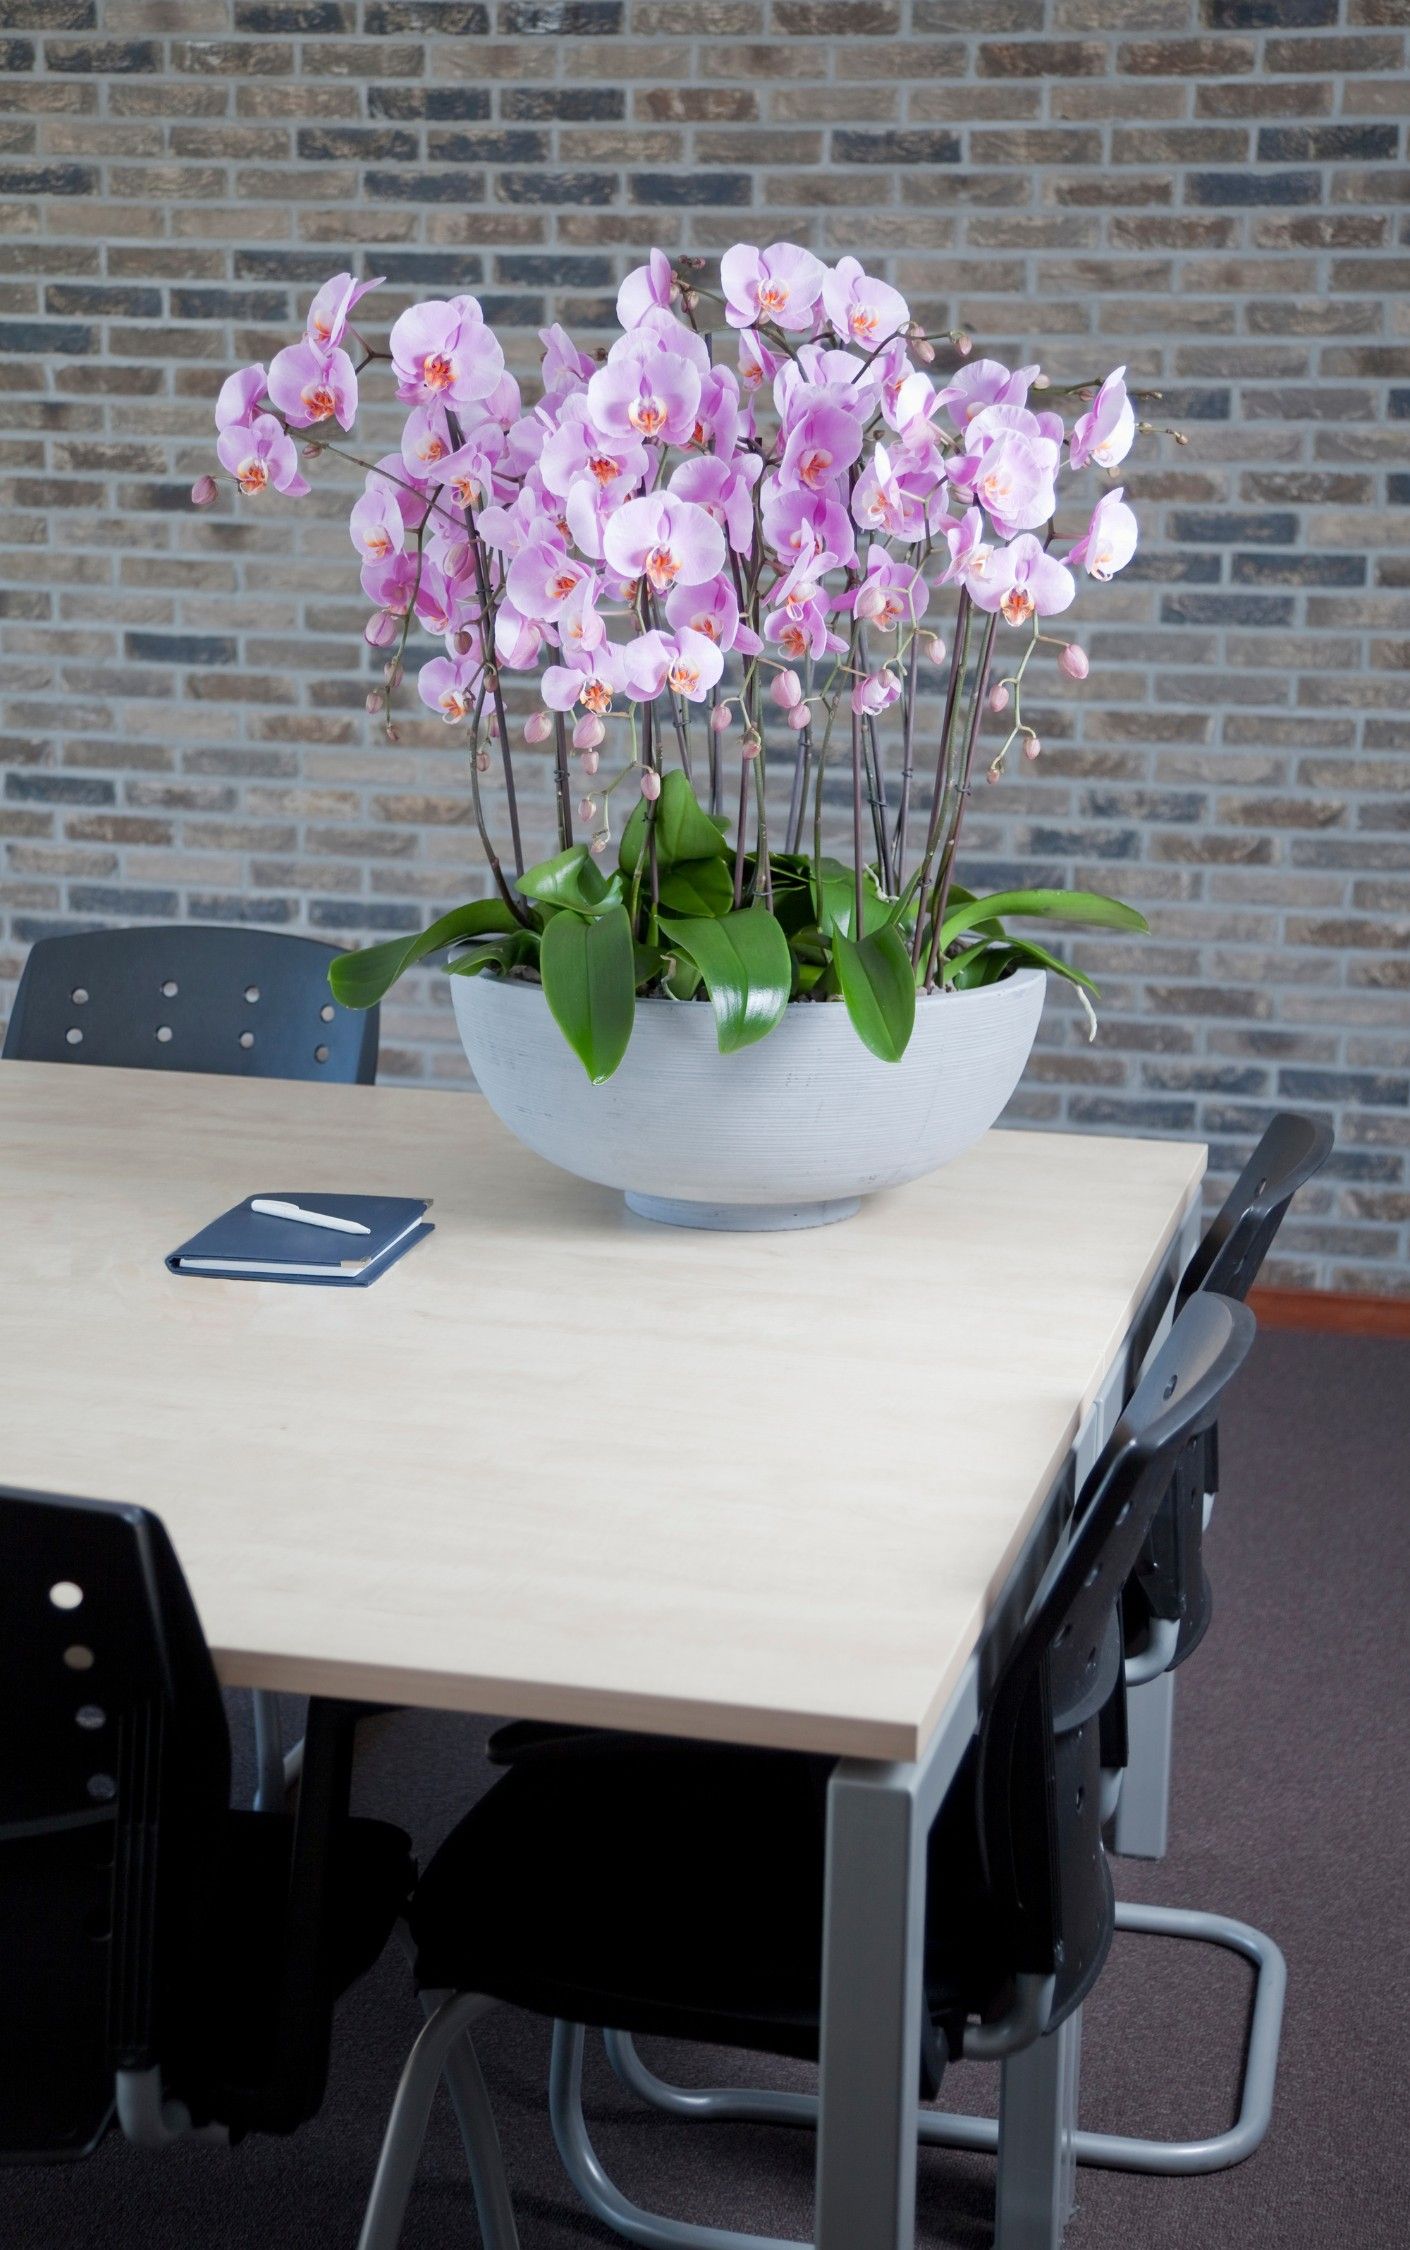 Orchids flowers on office desk